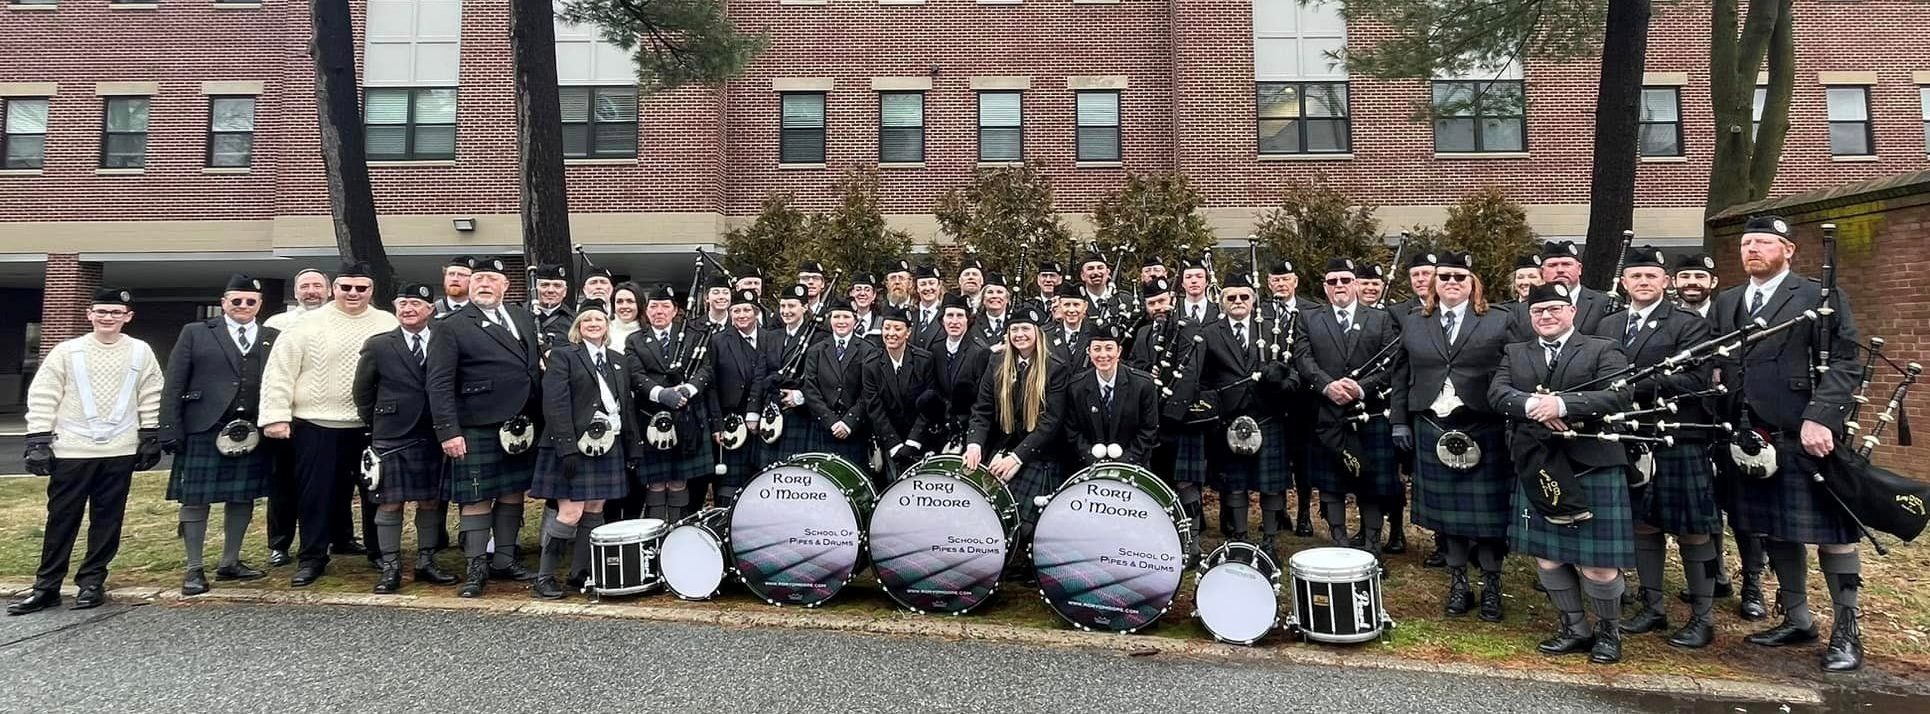 Rory O'Moore School of Pipes and Drums